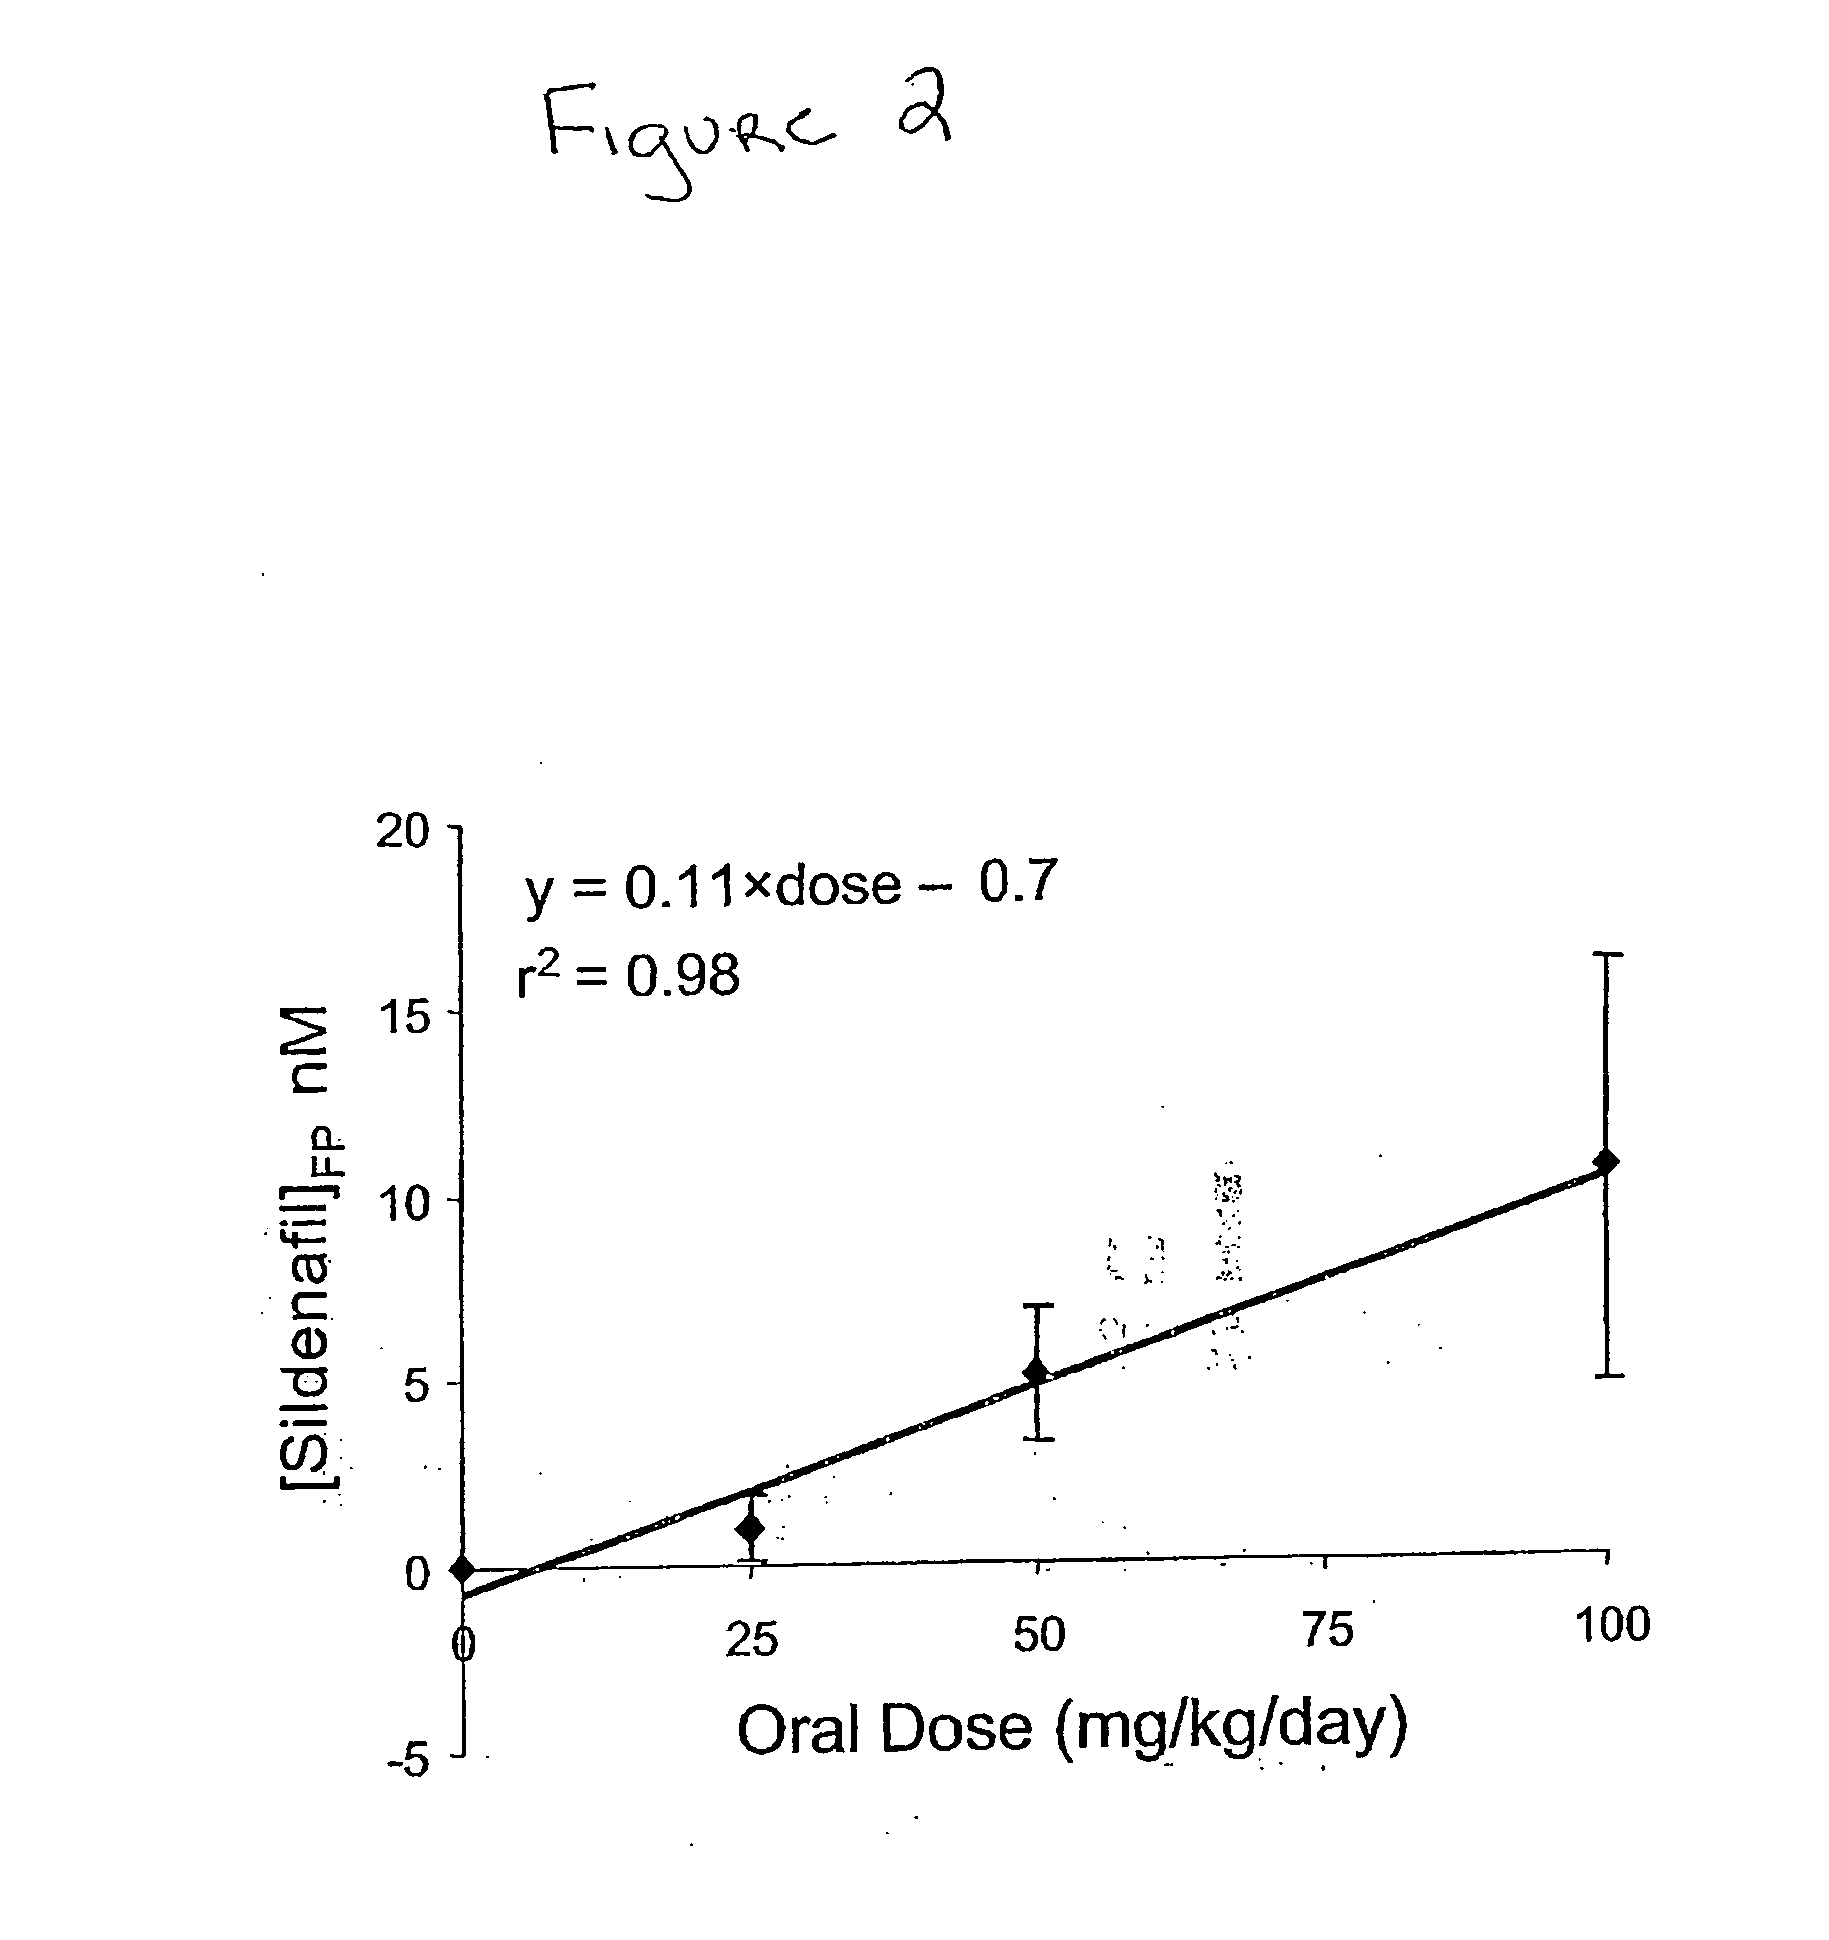 Pde5 inhibitor compositions and methods for treating cardiac indications